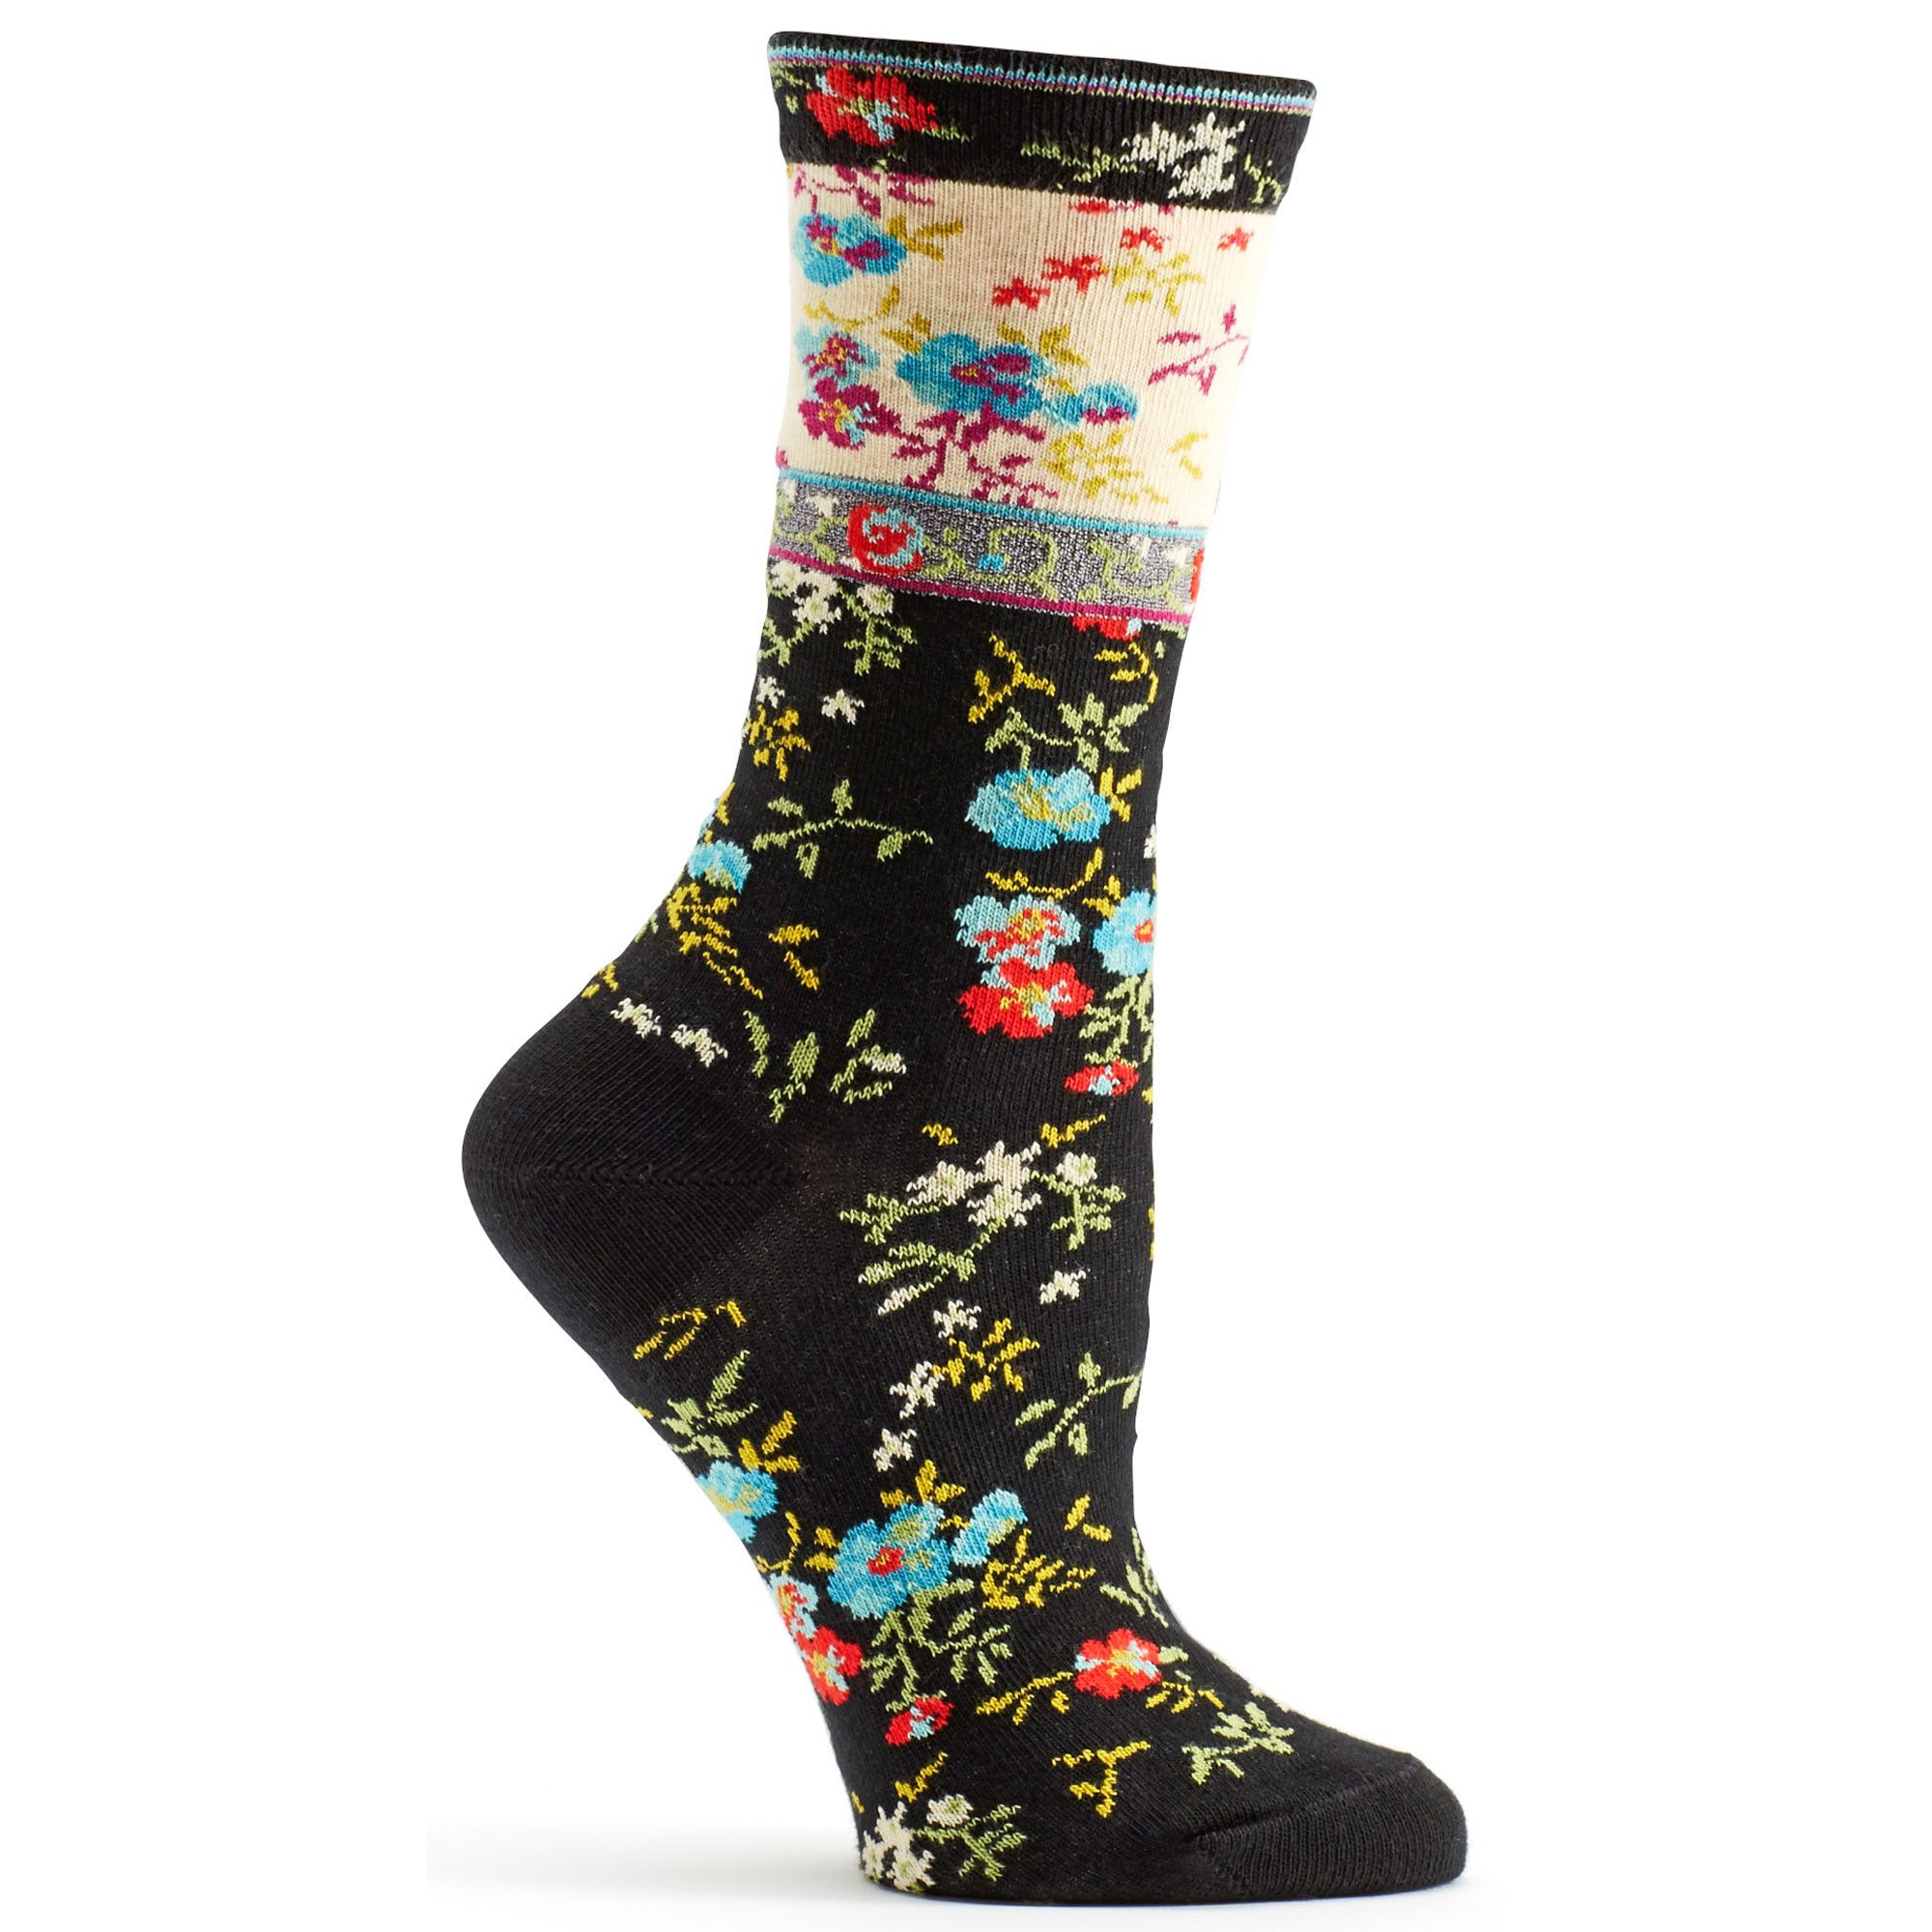 Ozone Socks Floral Mona Linen Sock - Assorted Colors - Free Shipping!